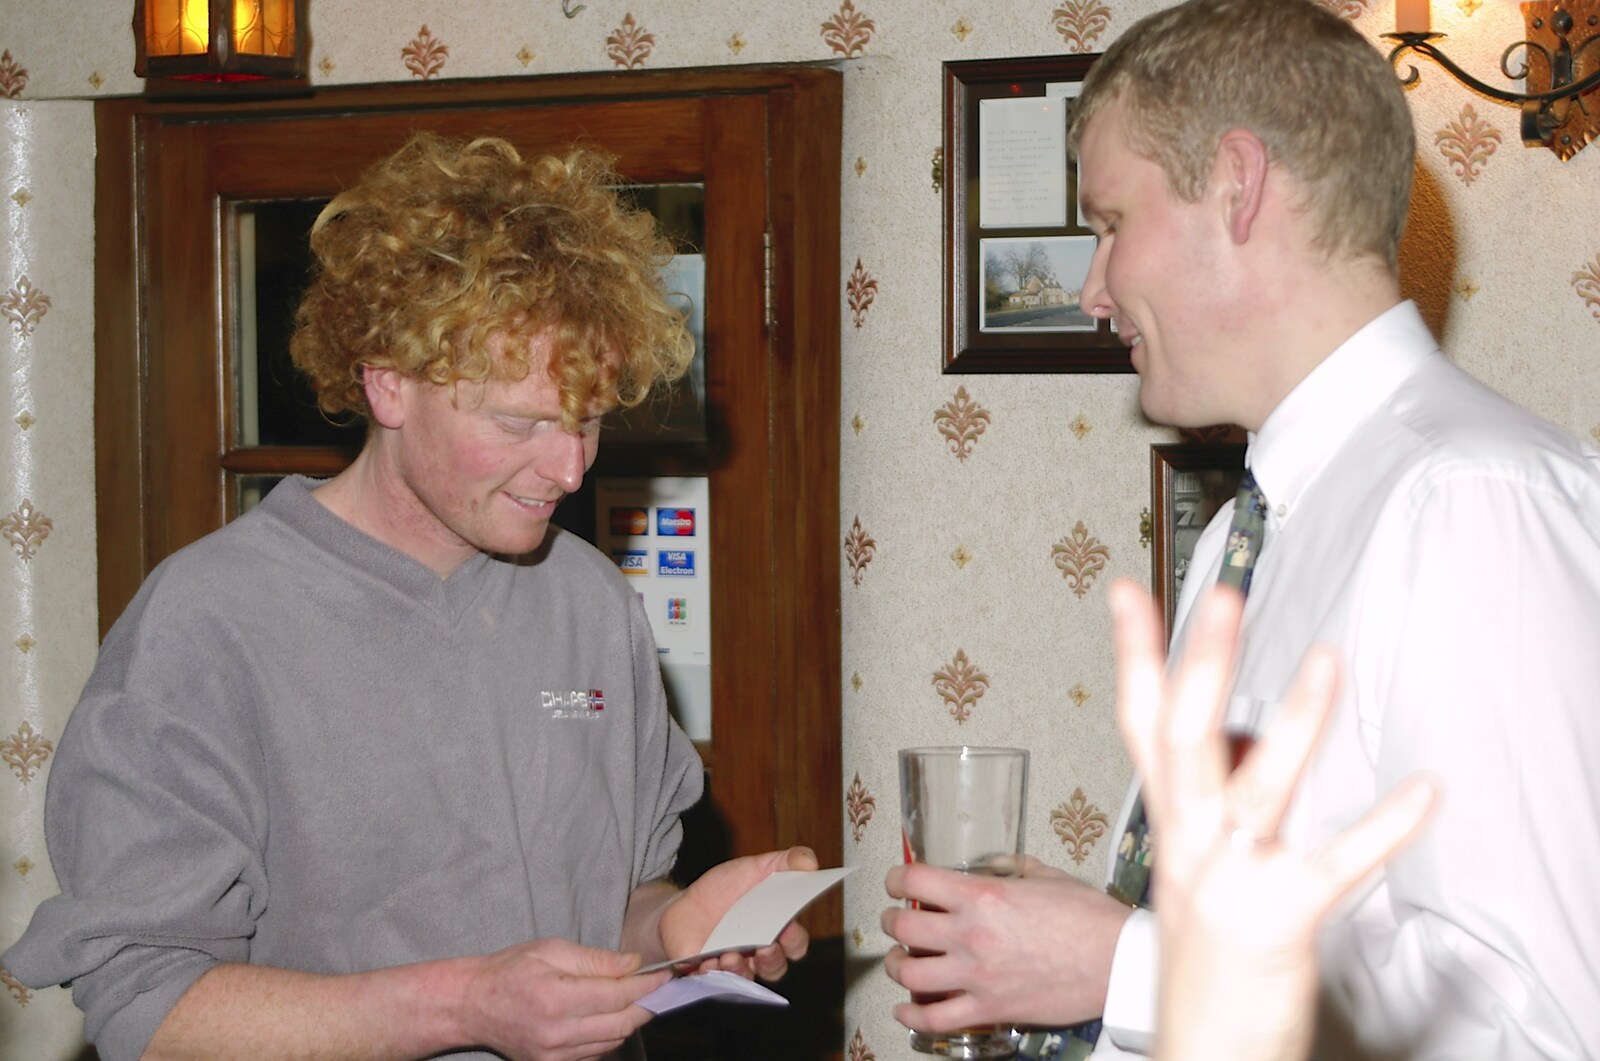 The BSCC Annual Dinner, The Brome Swan, Suffolk - 4th December 2004: Wavy gets a card